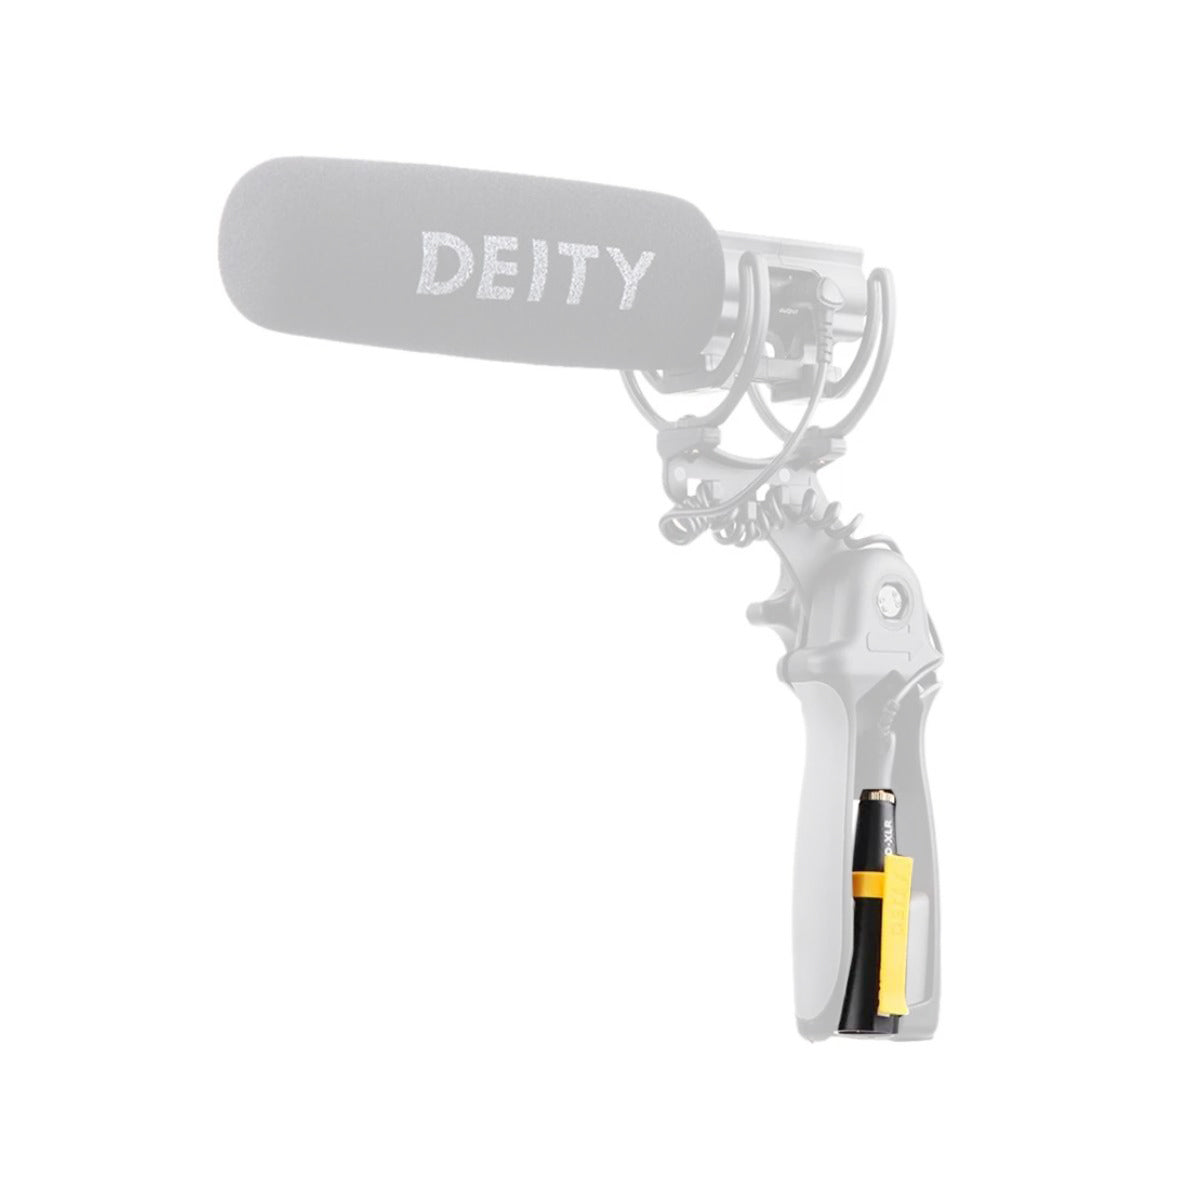 Deity D-XLR 3.5mm to XLR Adapter with Phantom Power Plug-in Converter for Microphones